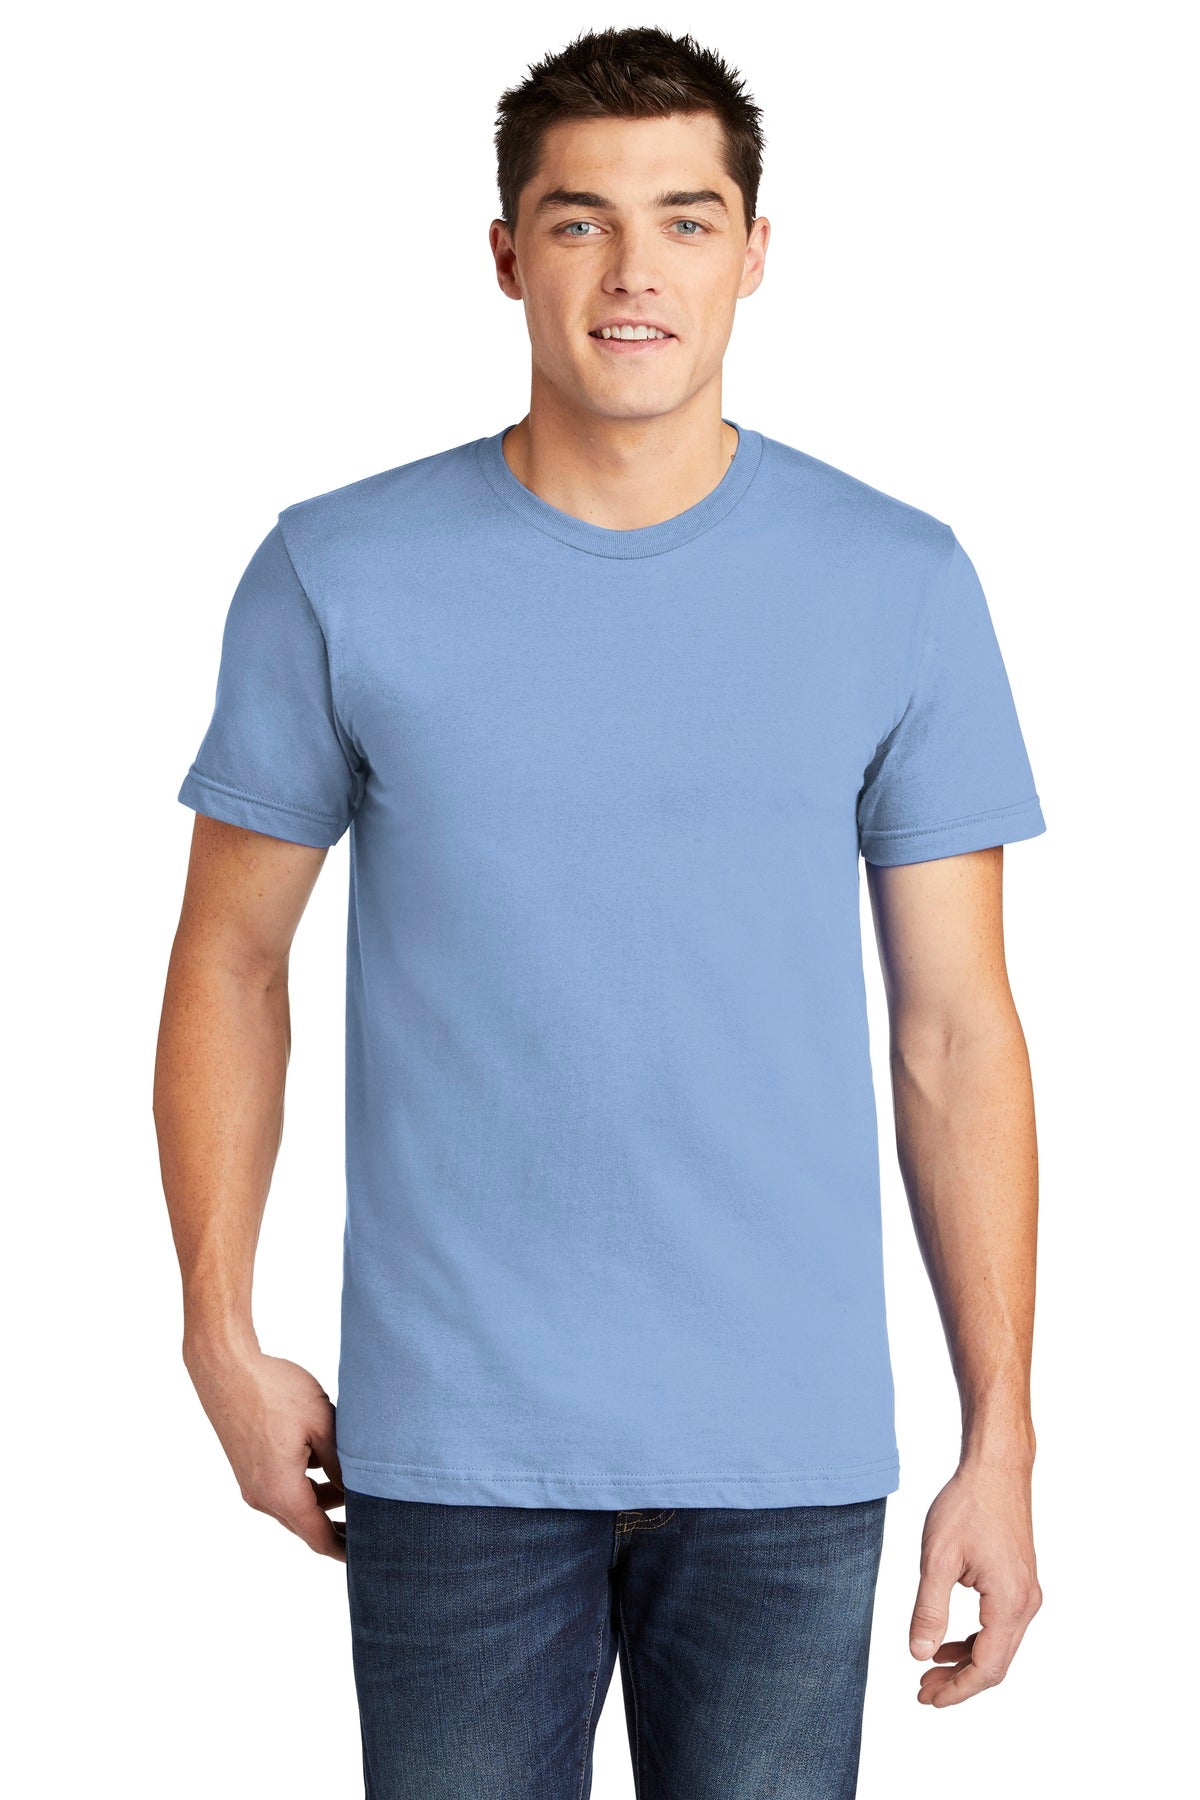 American Apparel ® USA Collection Fine Jersey T-Shirt. 2001A